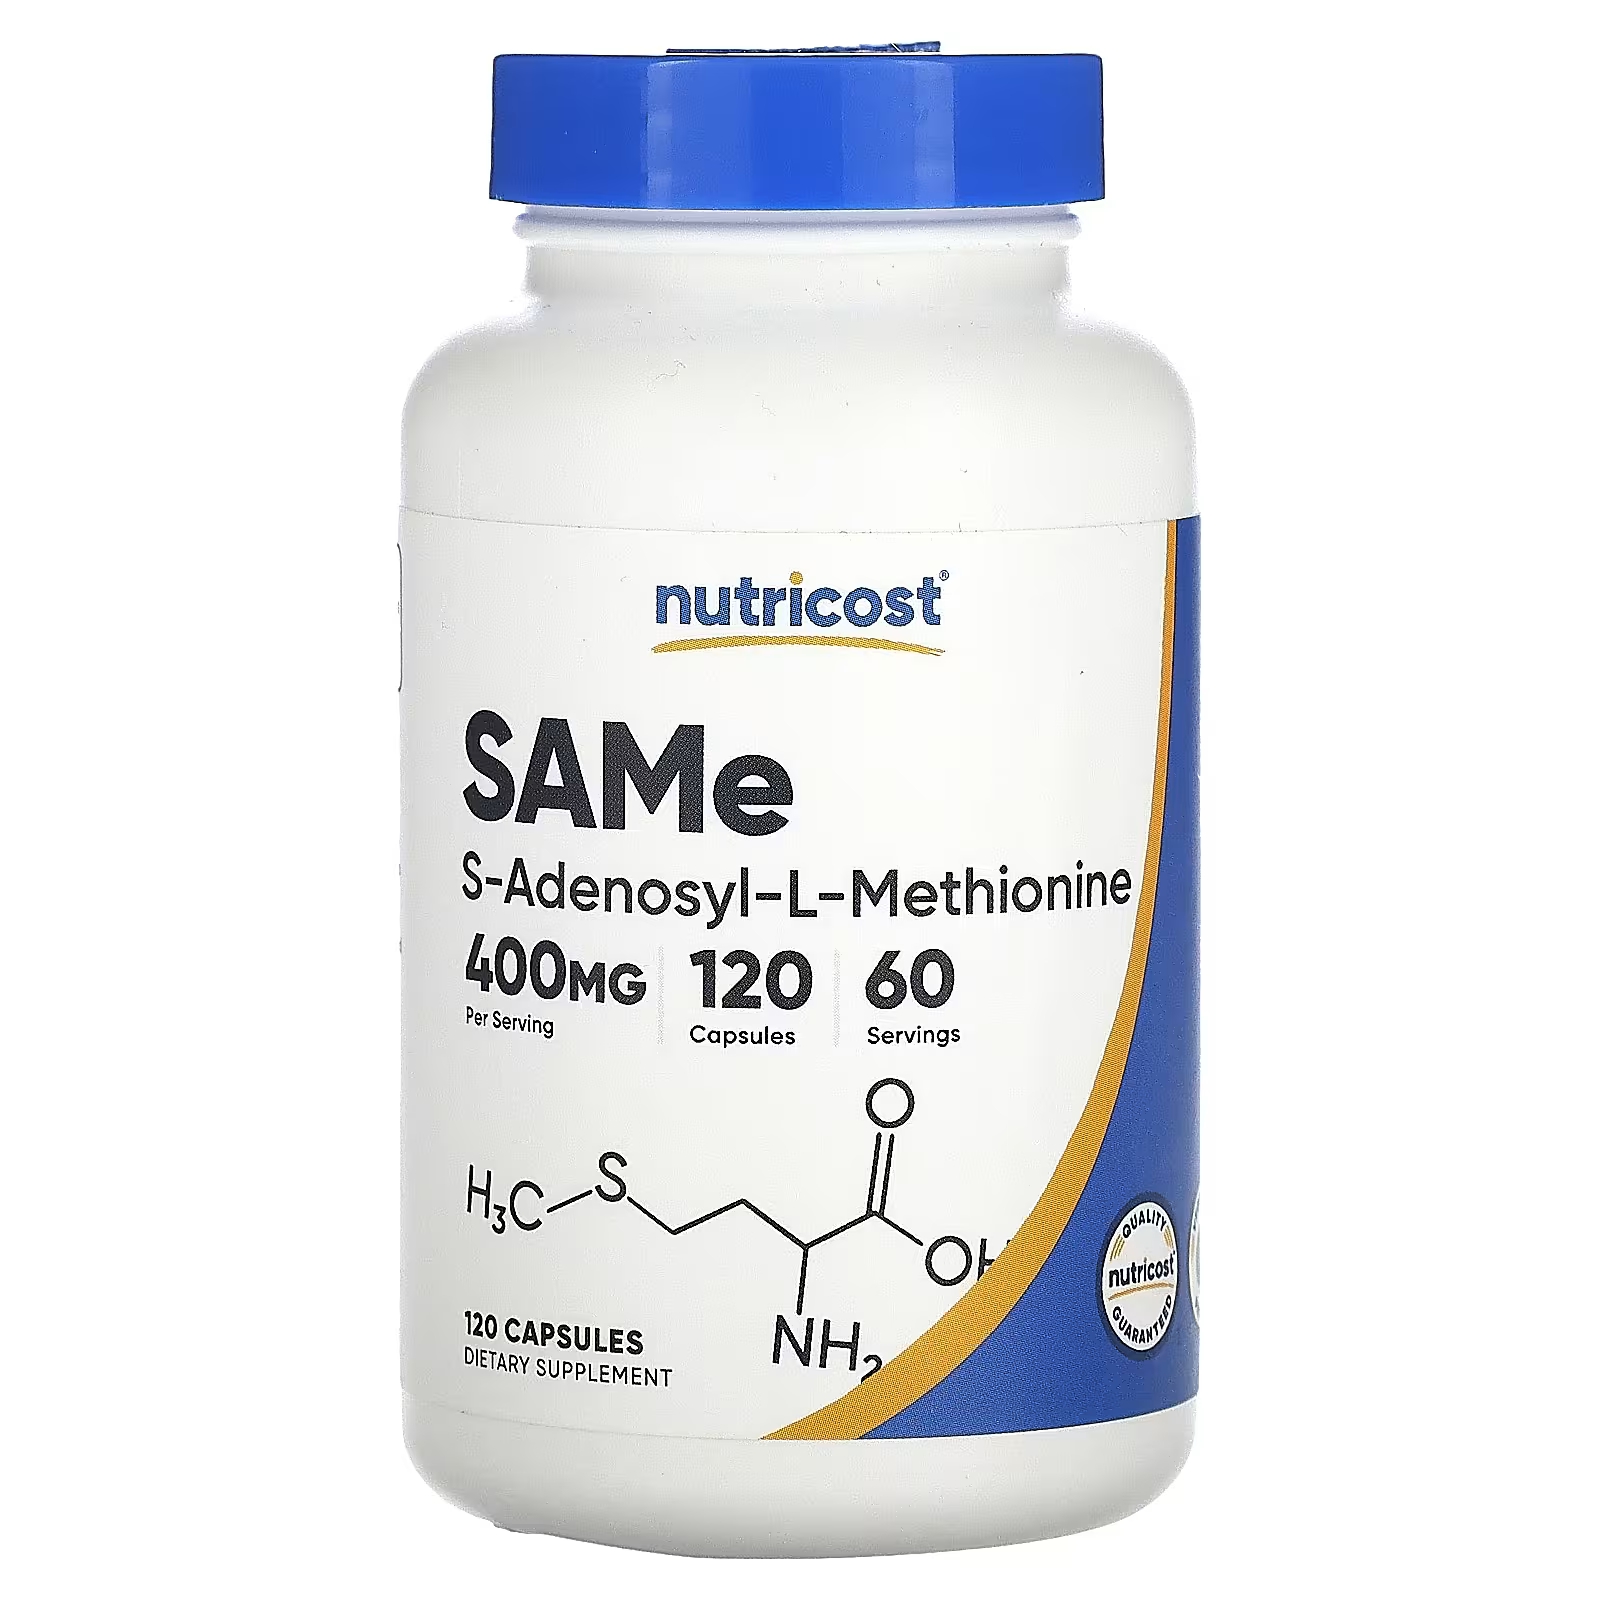 SAMe Nutricost 400 мг, 120 капсул (200 мг на капсулу)